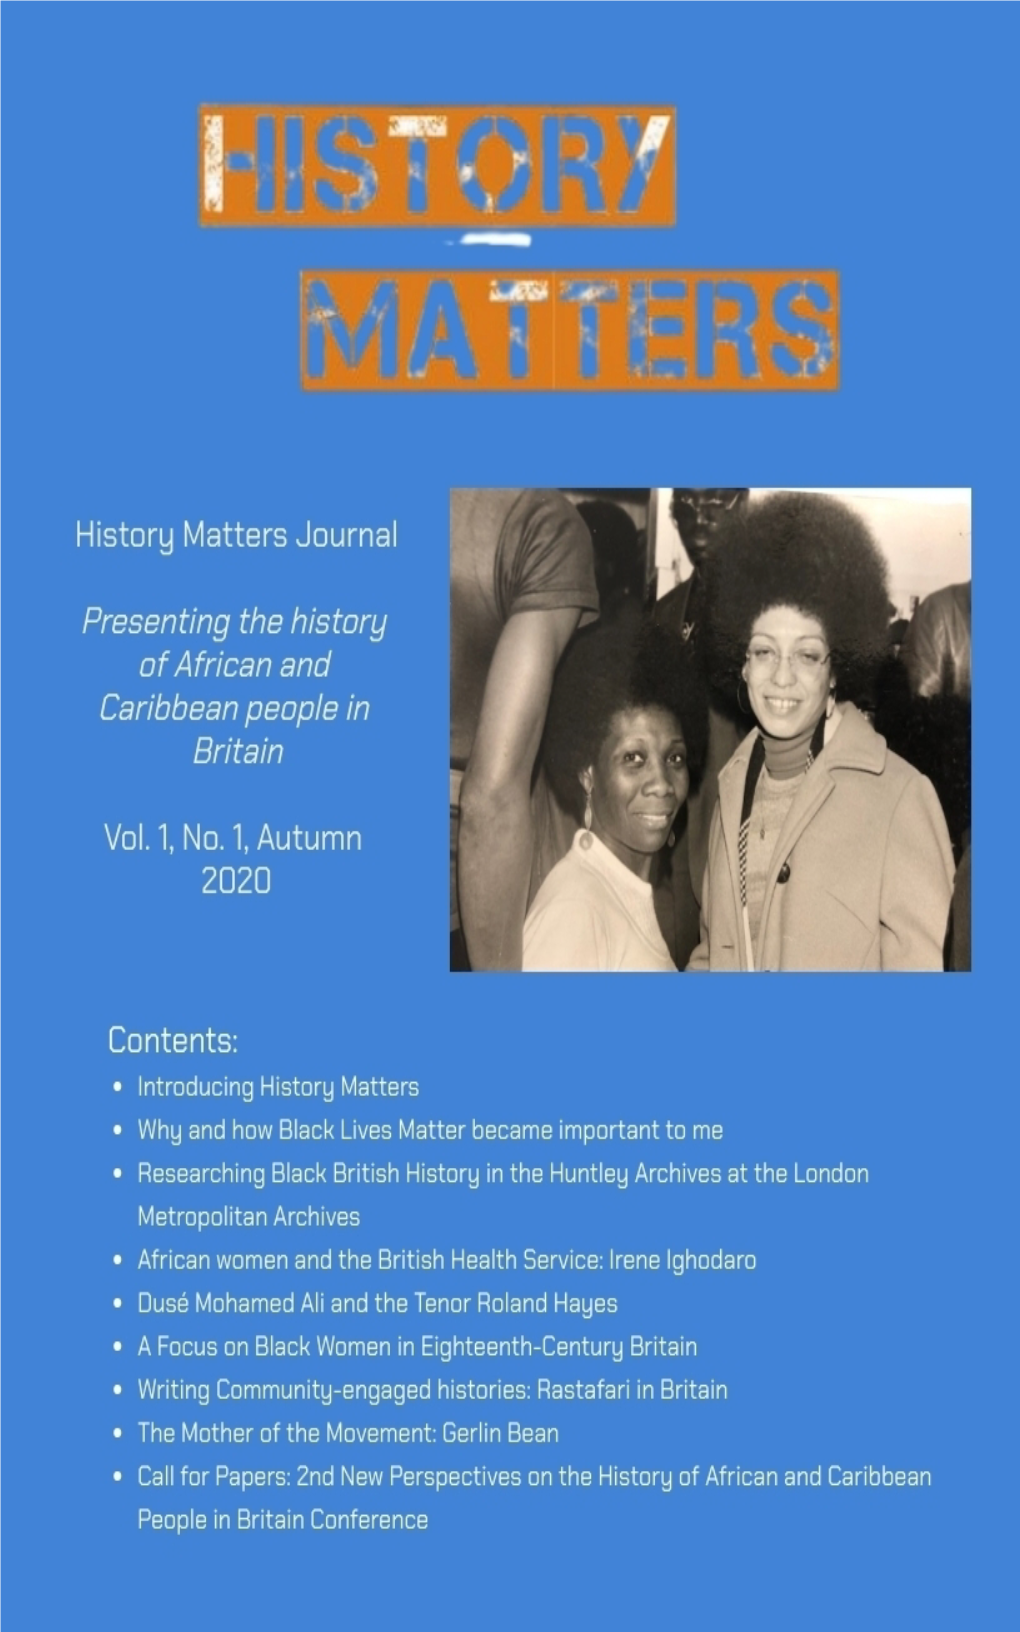 History Matters Journal Vol. 1 No. 1 Copyright © 2020 by History Matters